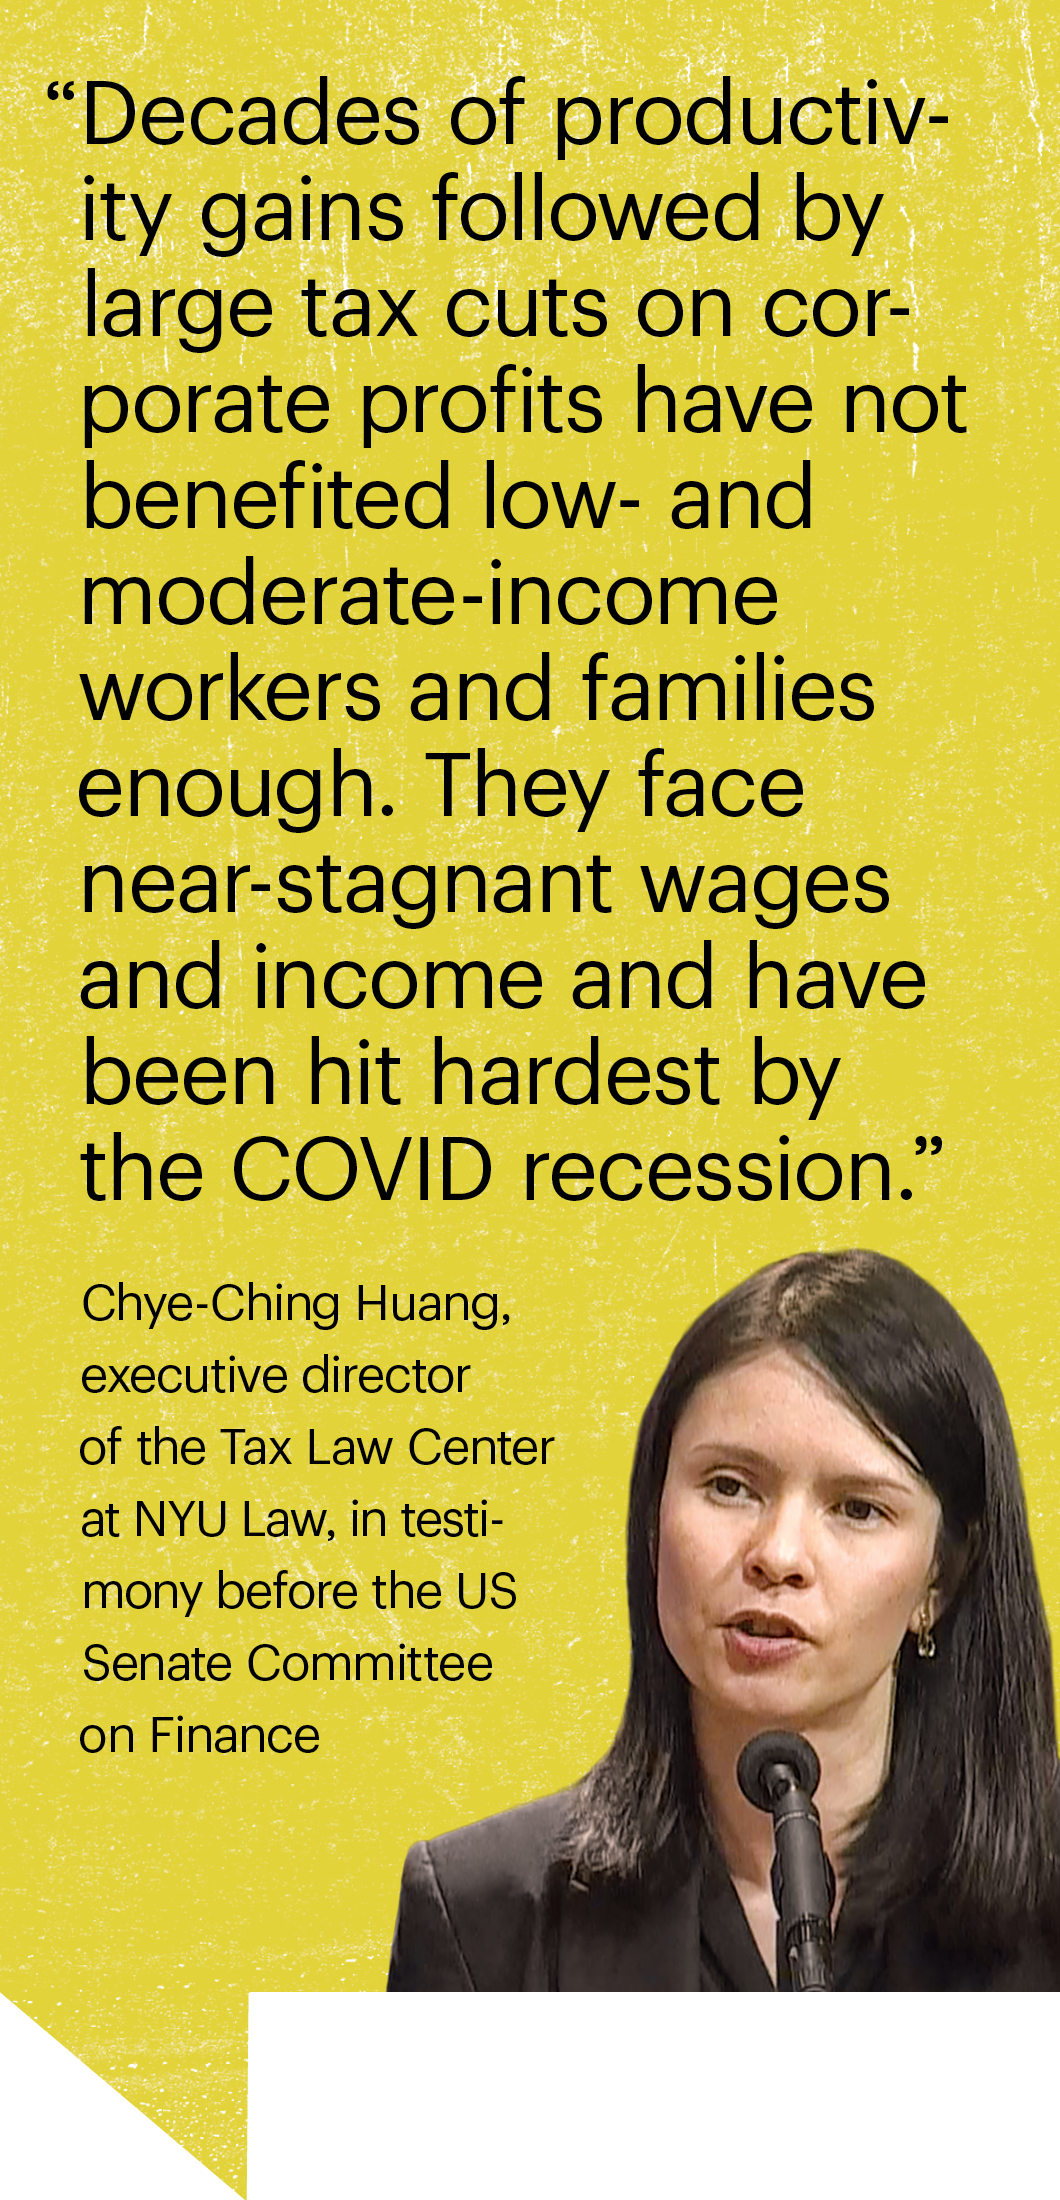 “Decades of productivity gains followed by large tax cuts on corporate profits have not benefited low- and moderate-income workers and families enough. They face near-stagnant wages and income and have been hit hardest by the COVID recession.” Chye-Ching Huang,  executive director  of the Tax Law Center  at NYU Law, in testimony before the US Senate Committee  on Finance